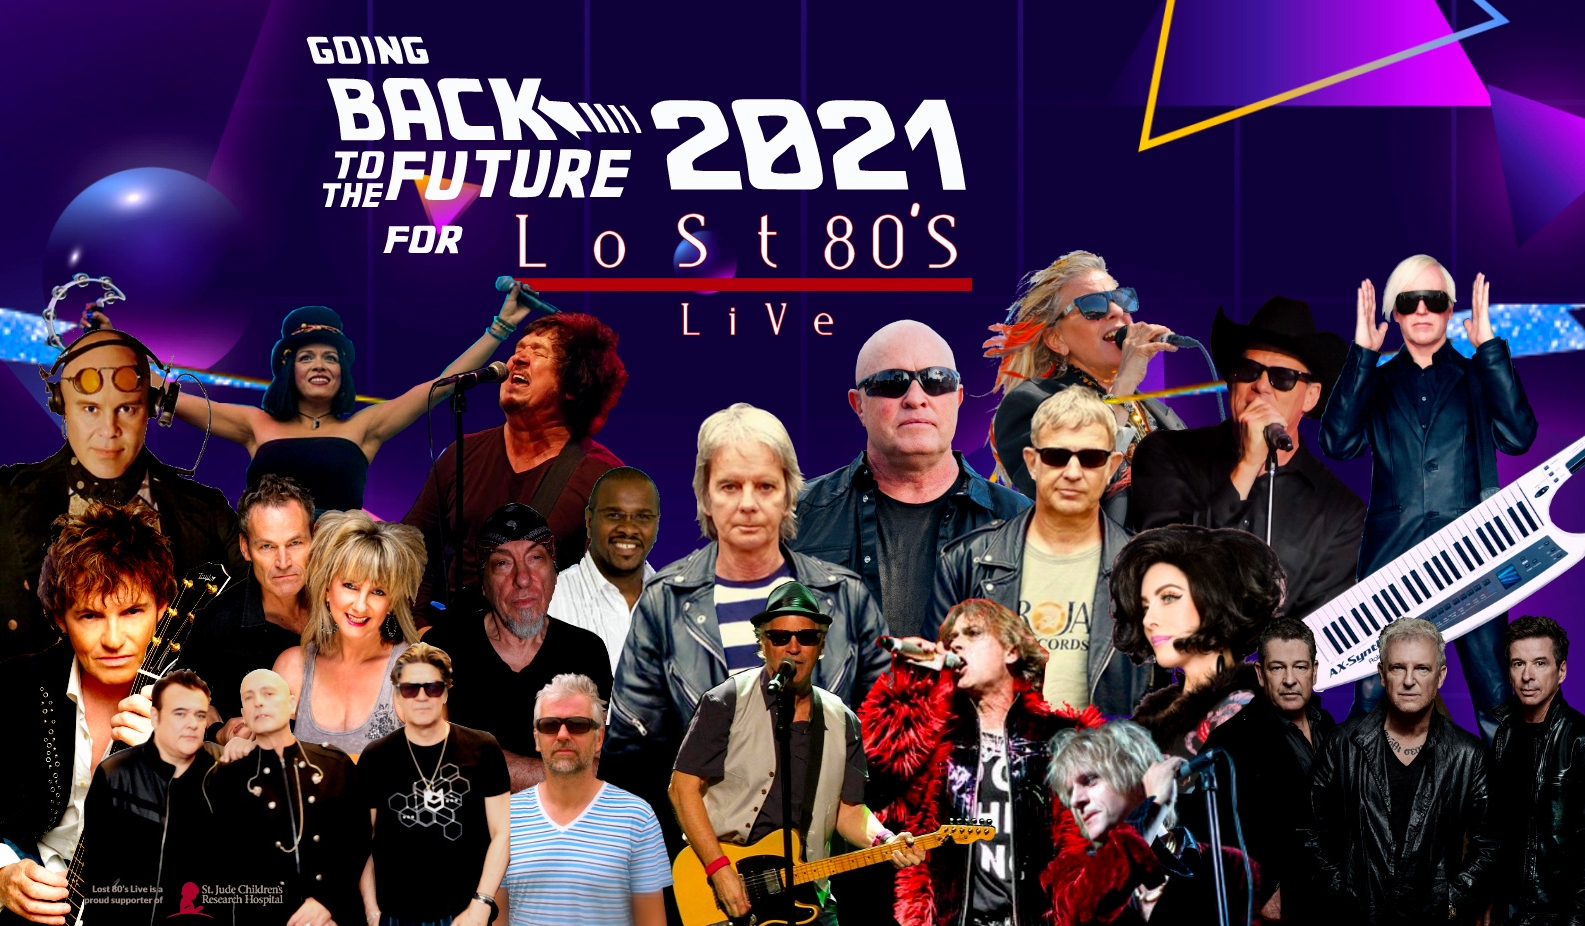 Here we go, going Back to the Future 2021 for Lost 80's Live! - Lost ...